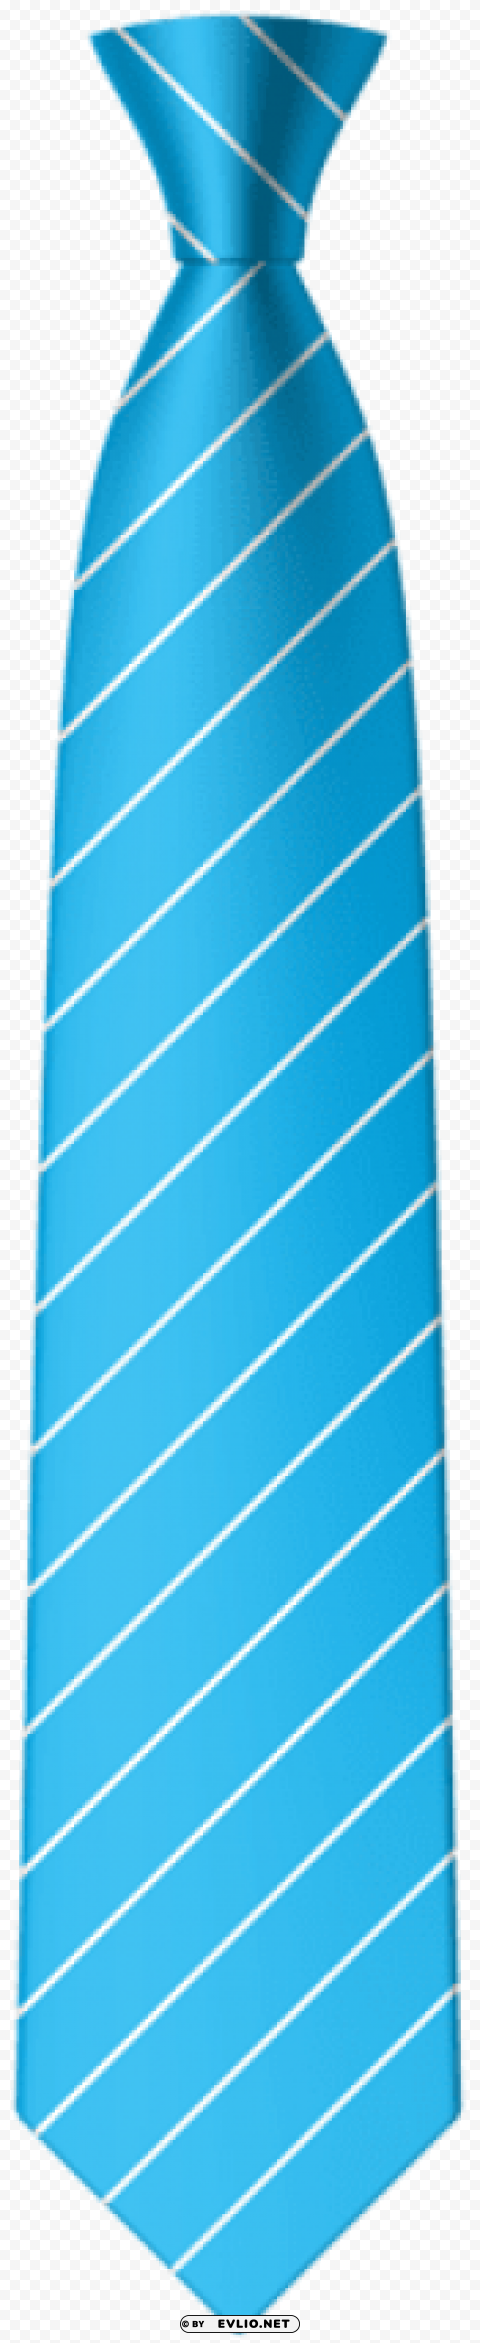 blue tie PNG Image with Clear Background Isolation